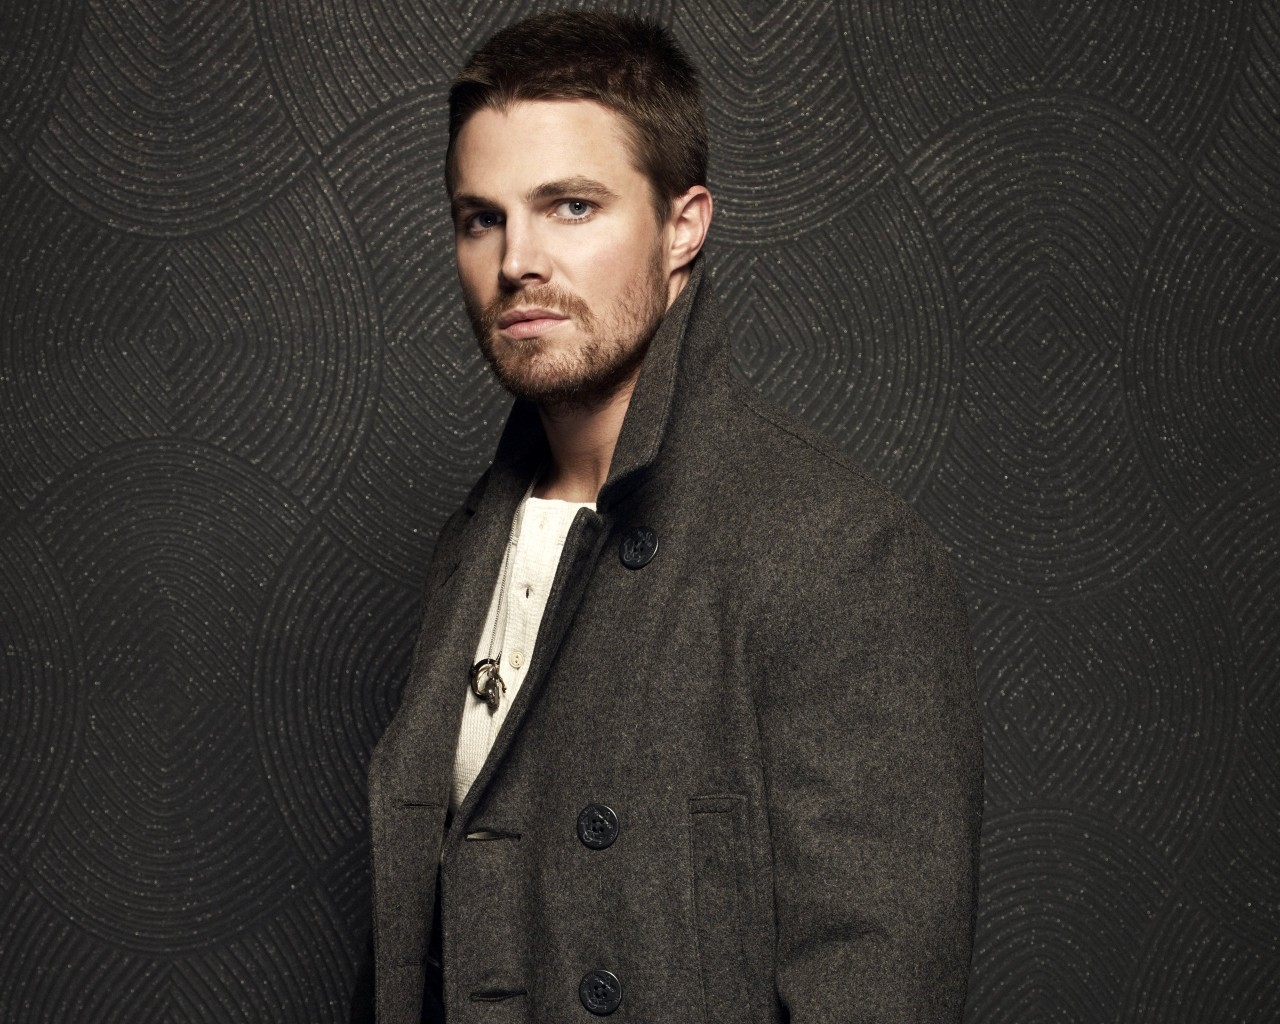 Stephen Amell for 1280 x 1024 resolution